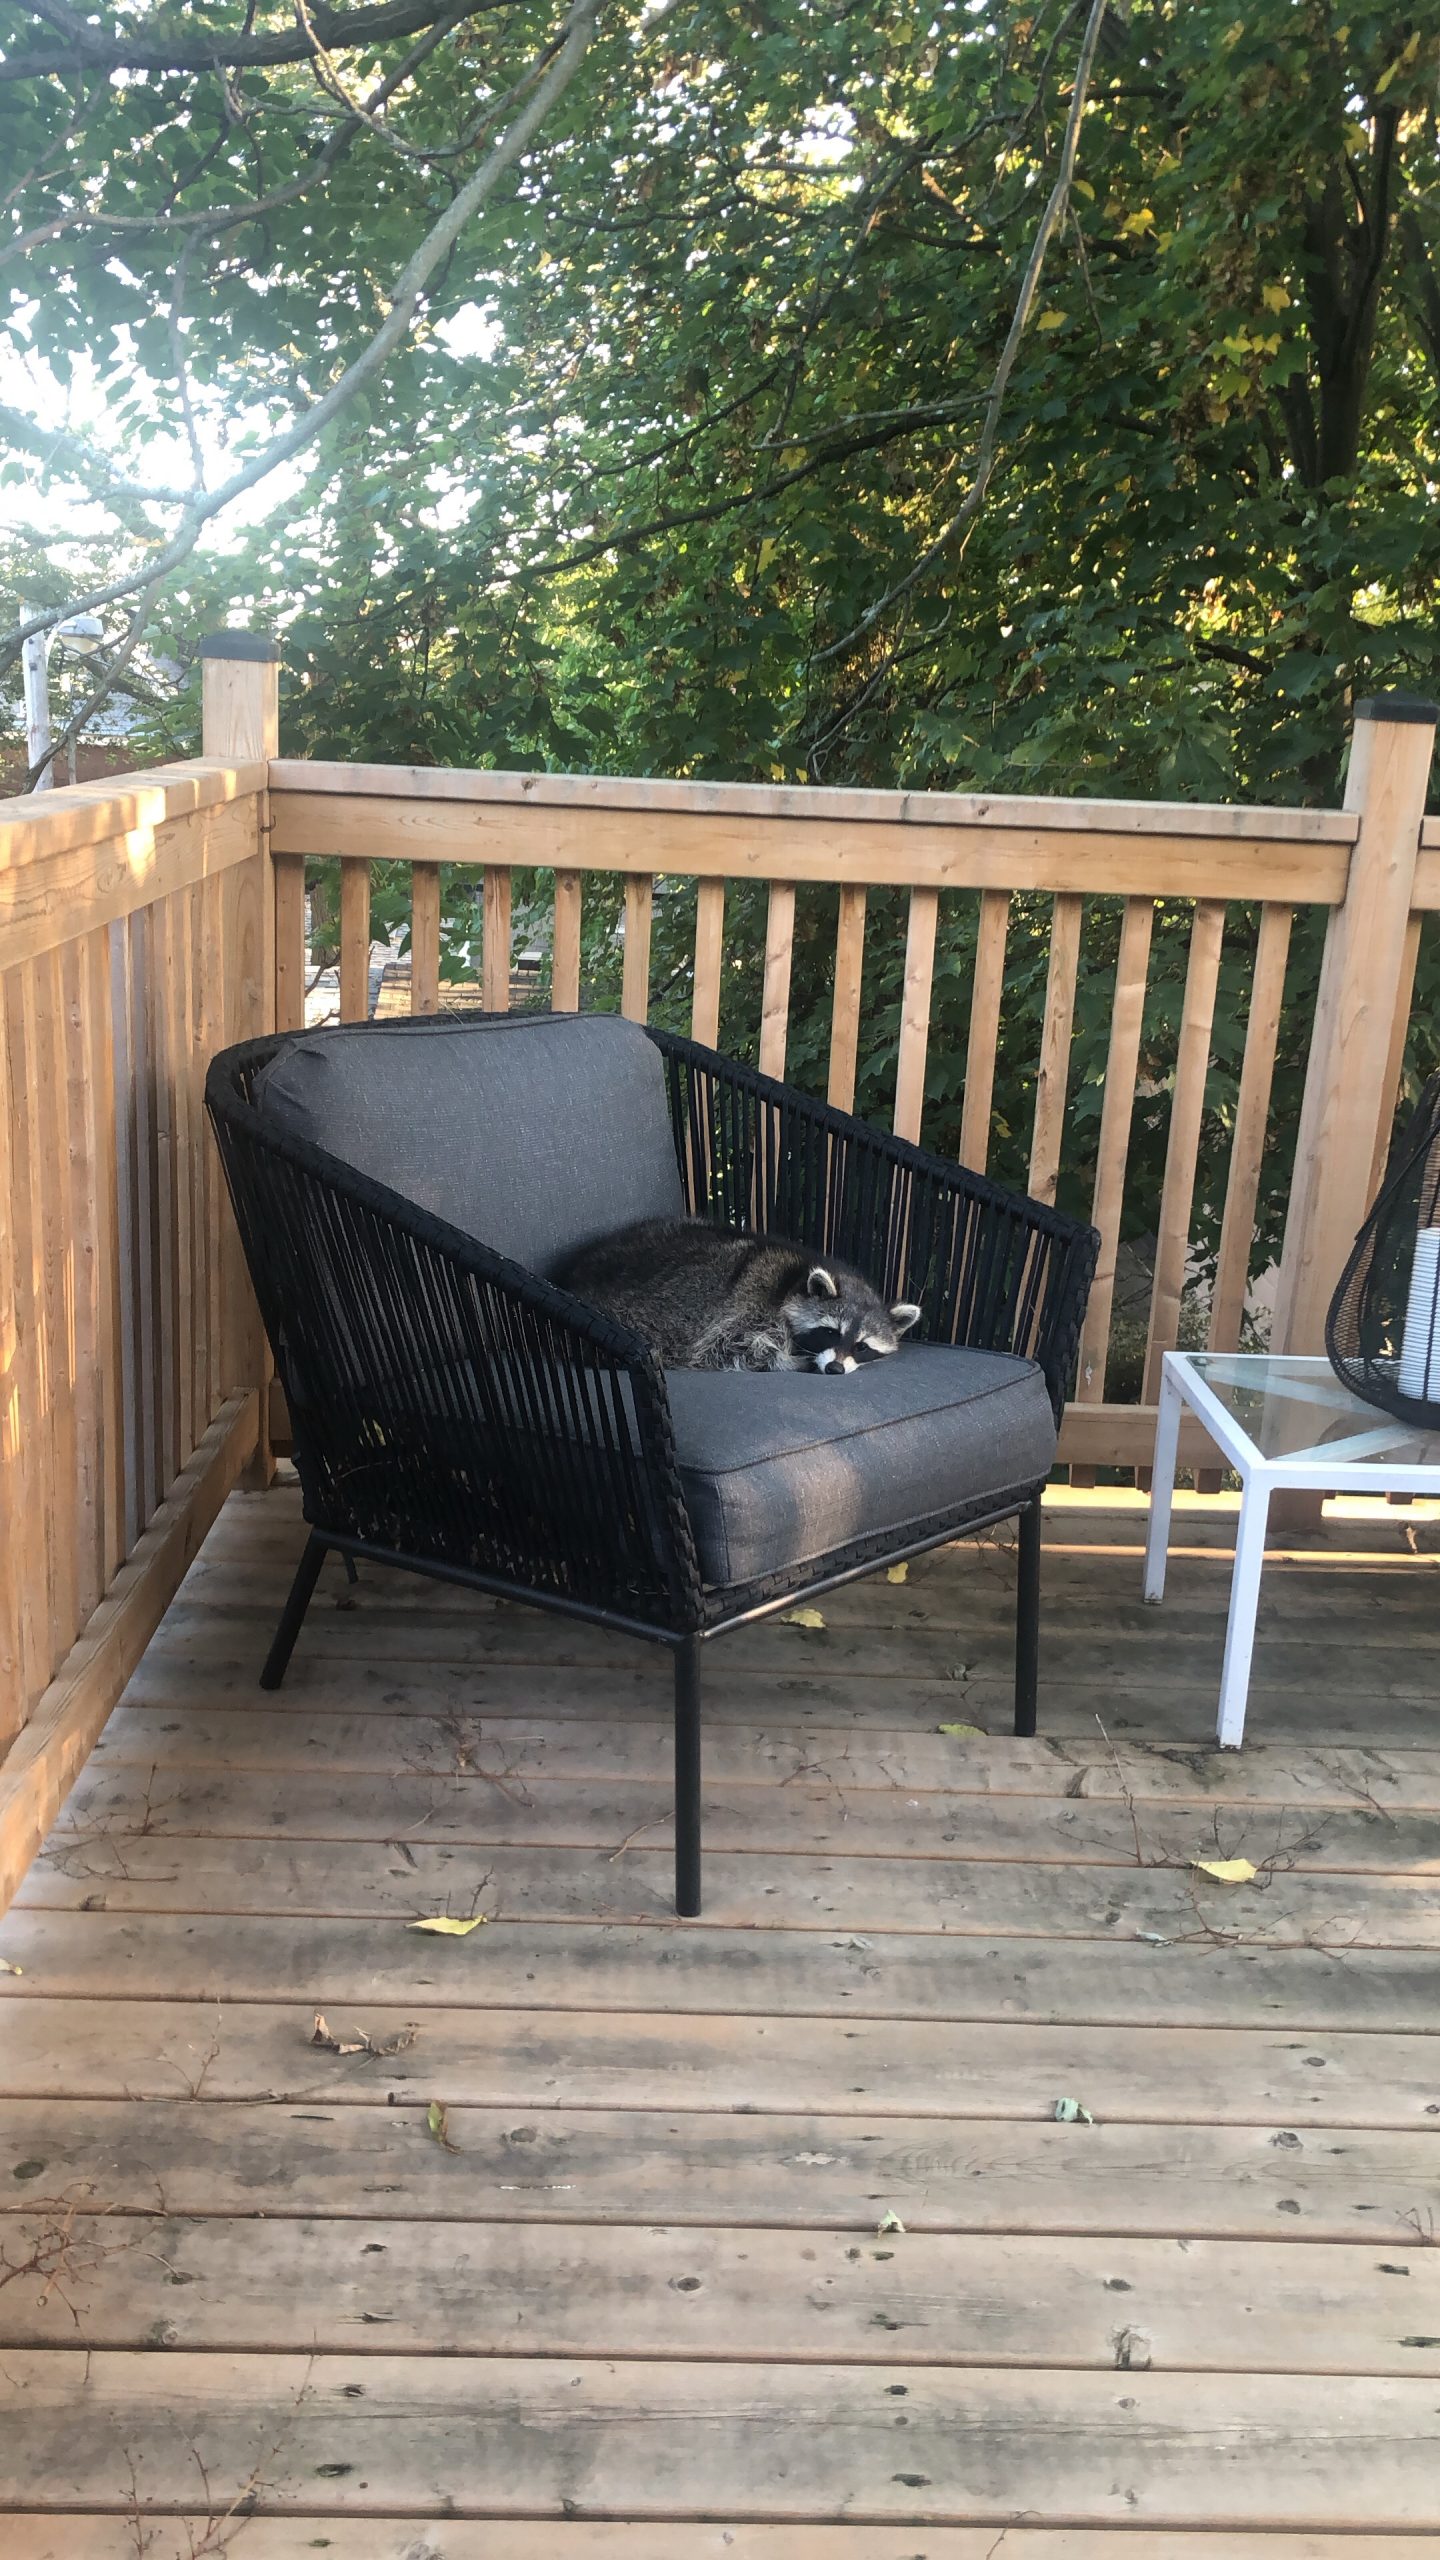 Raccoon sitting on chair on porch